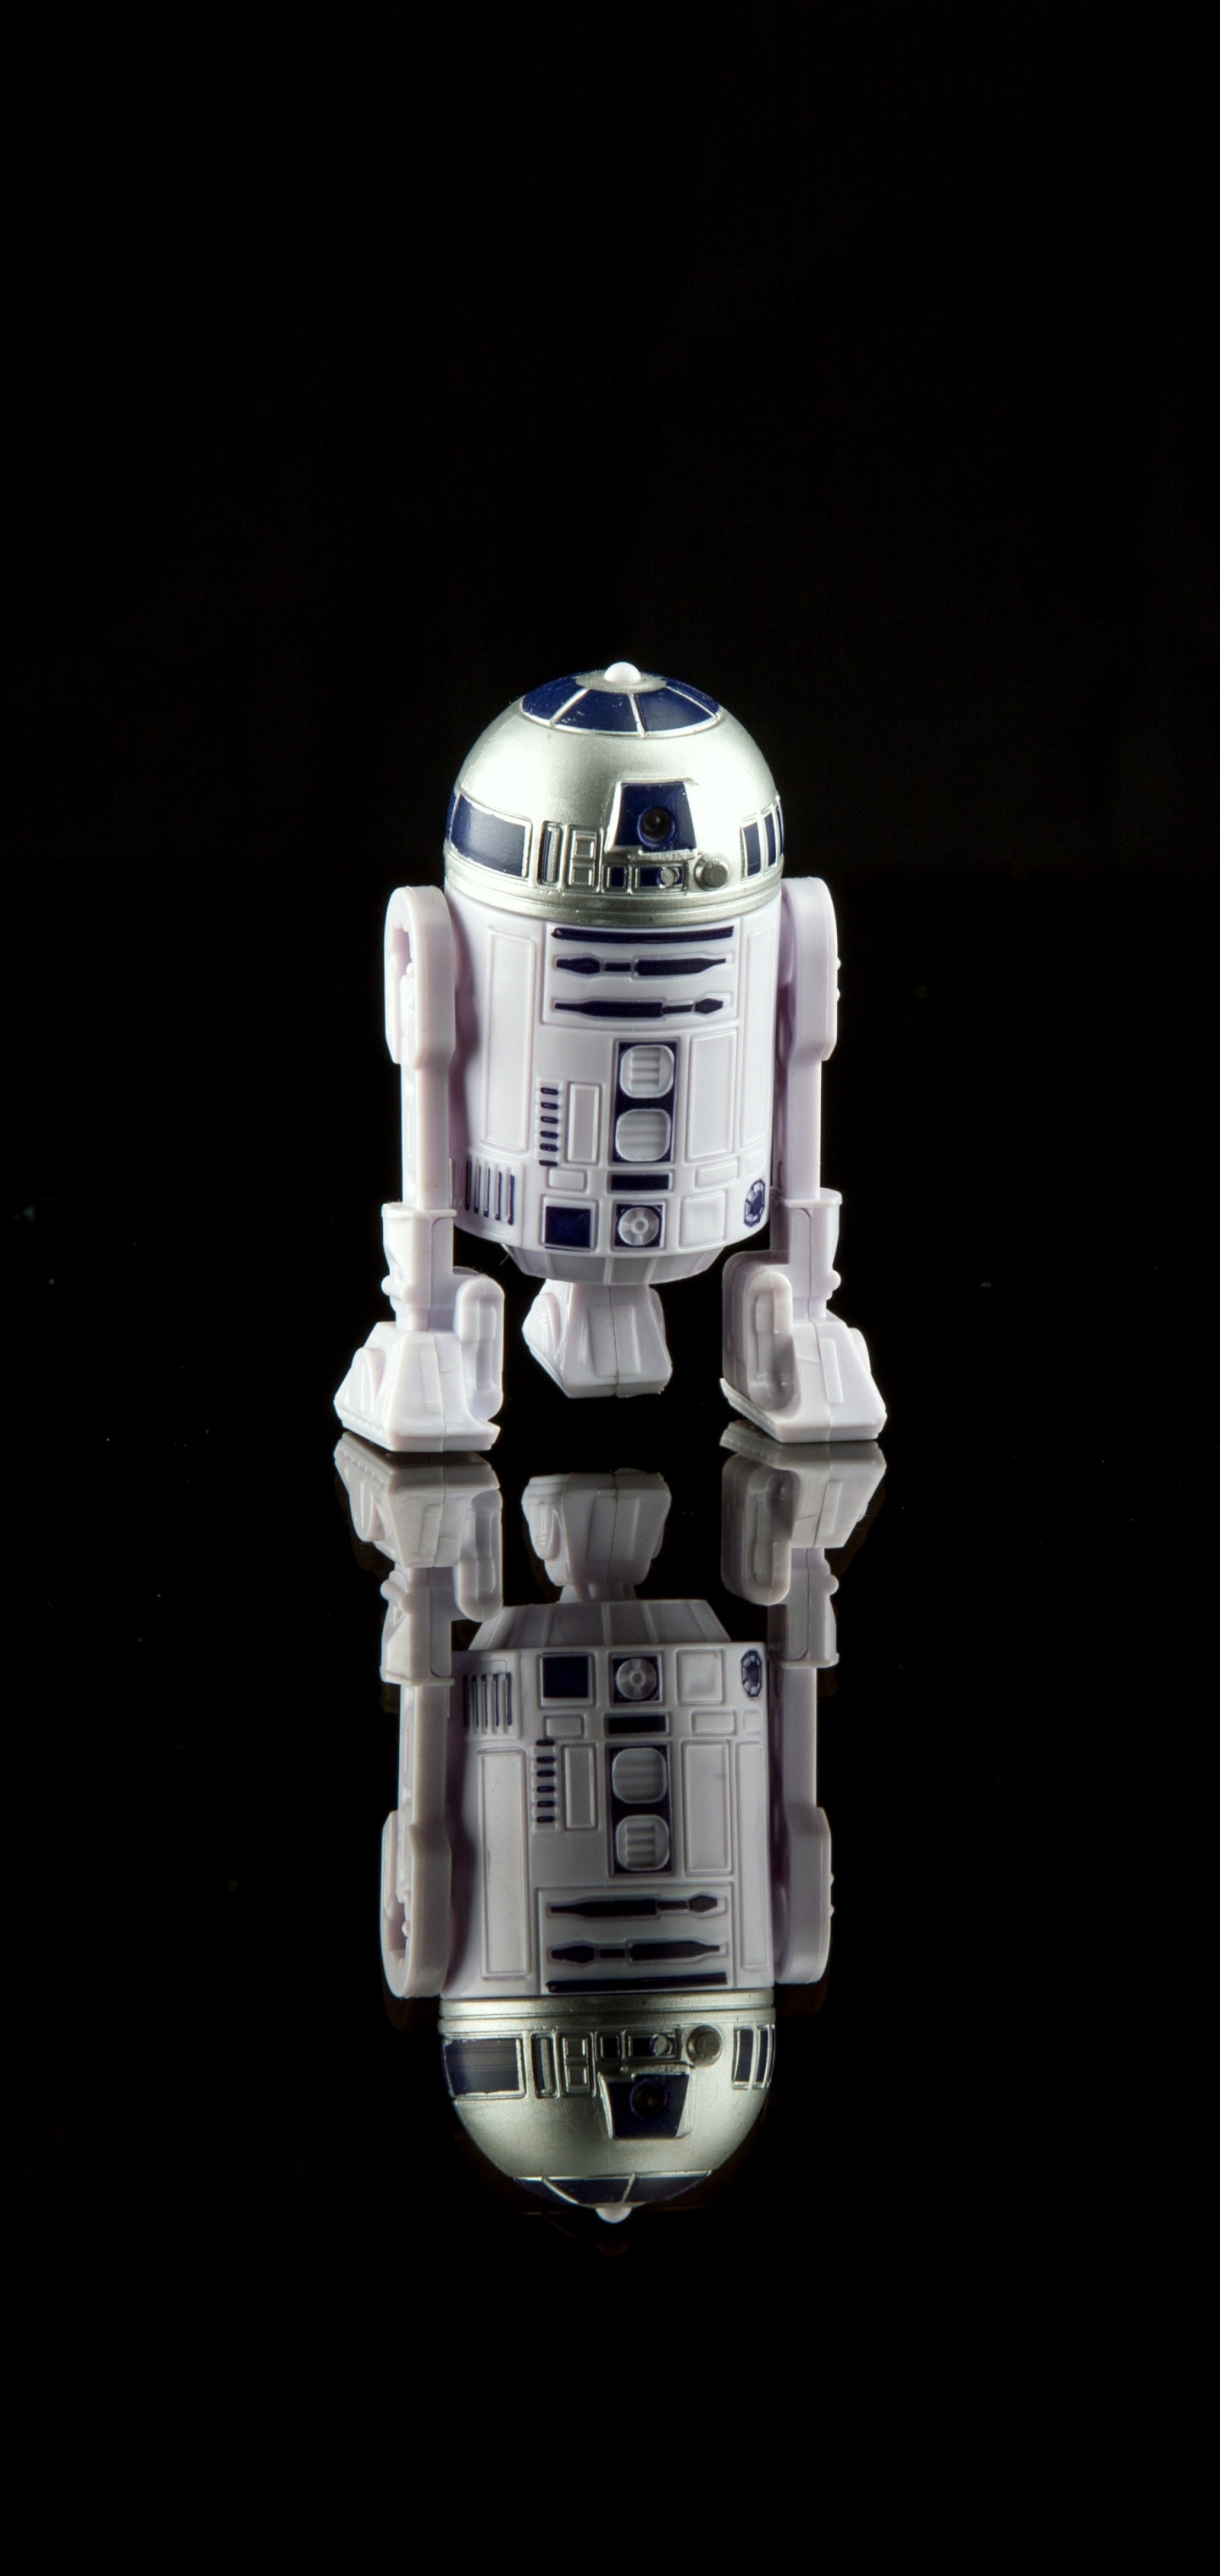 man made, toy, reflection, minimalist, star wars, droid, r2 d2 for android